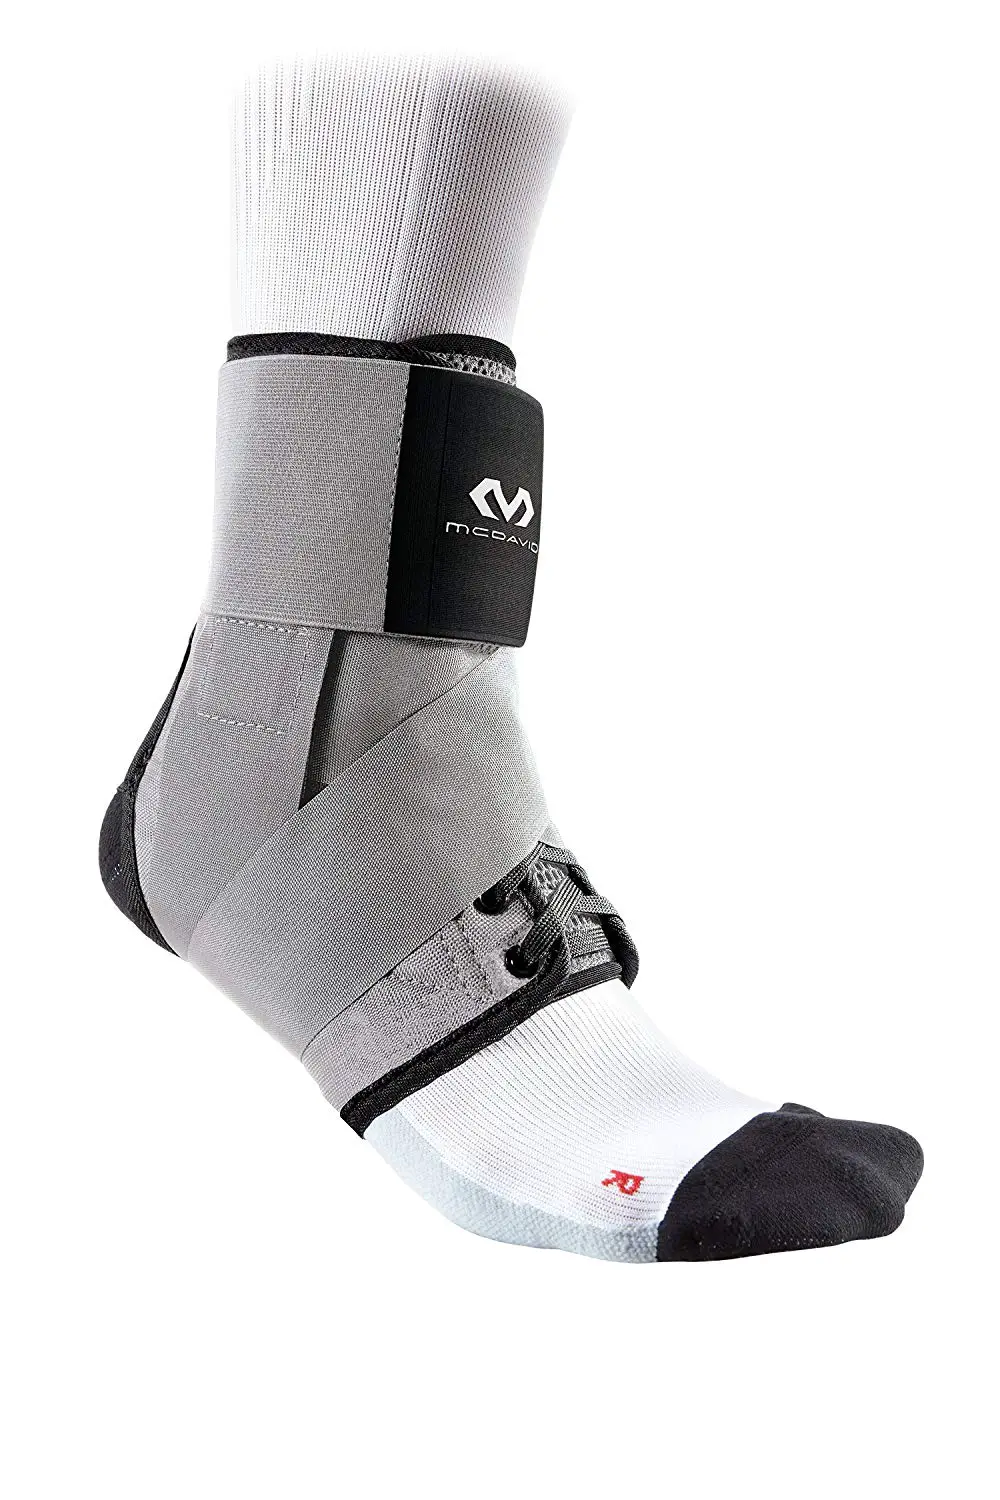 running ankle braces reviewed